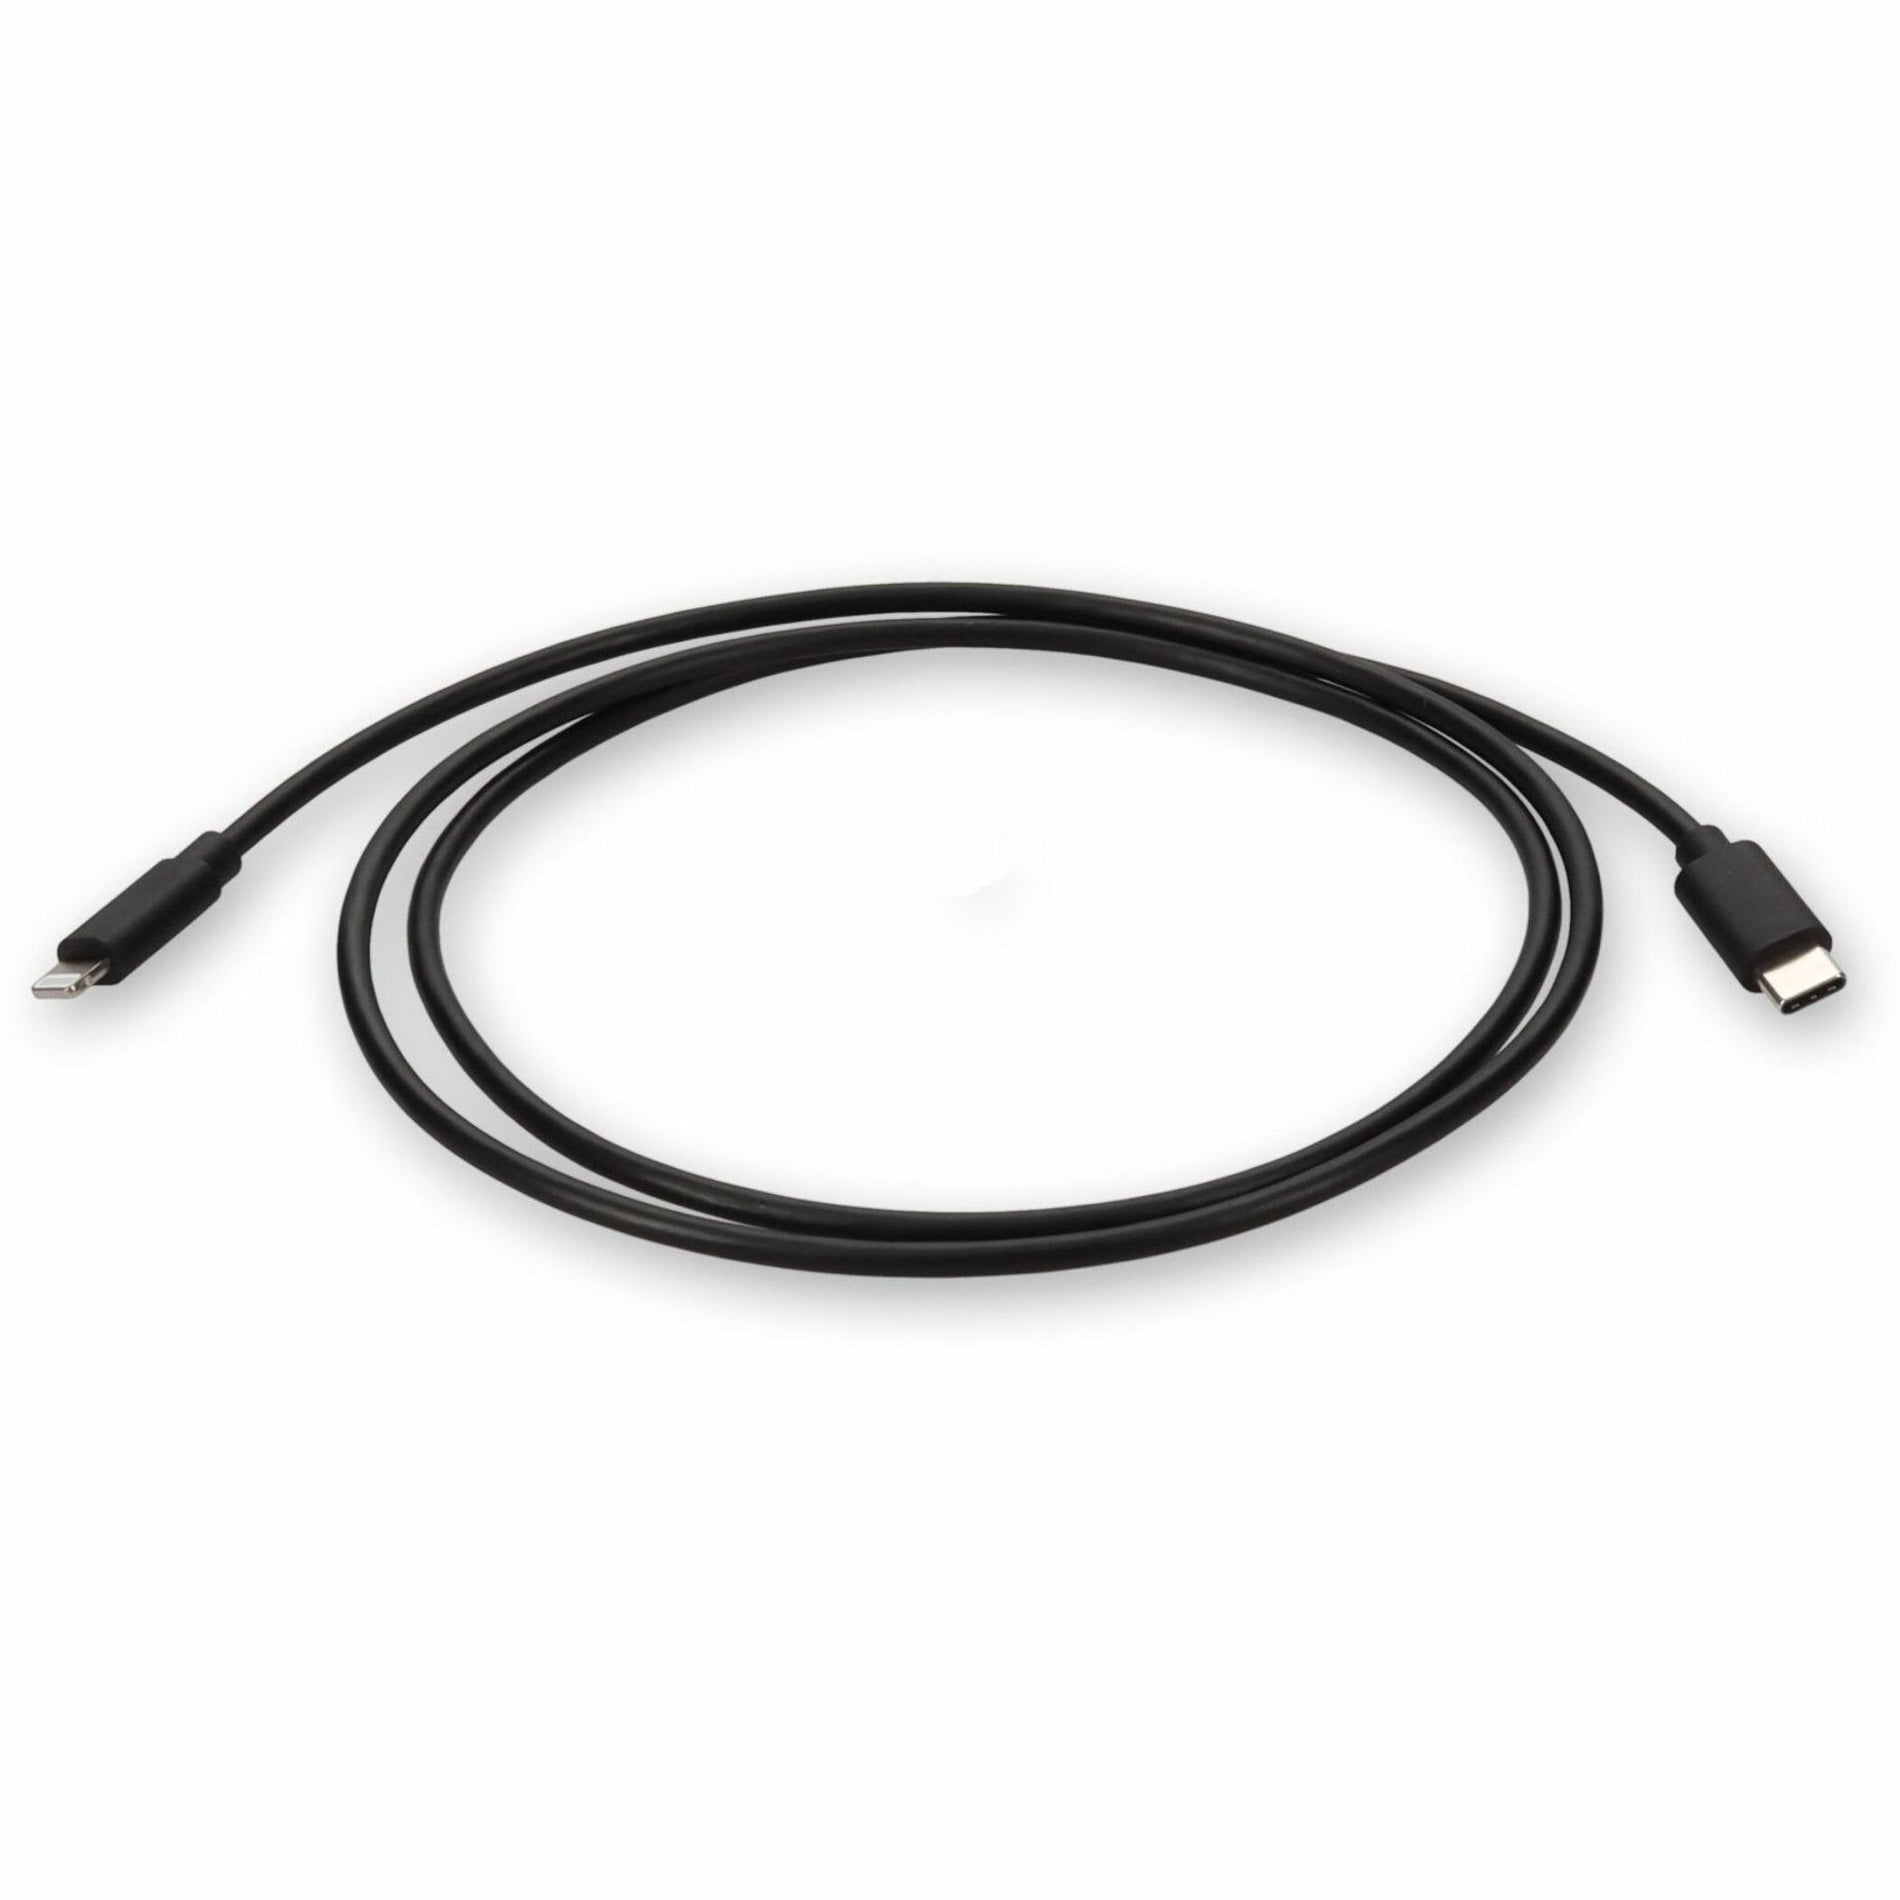 AddOn USBC2LGTTPE1M 1m USB 2.0 (C) Male to Lightning Male Black Cable, Data Transfer Cable